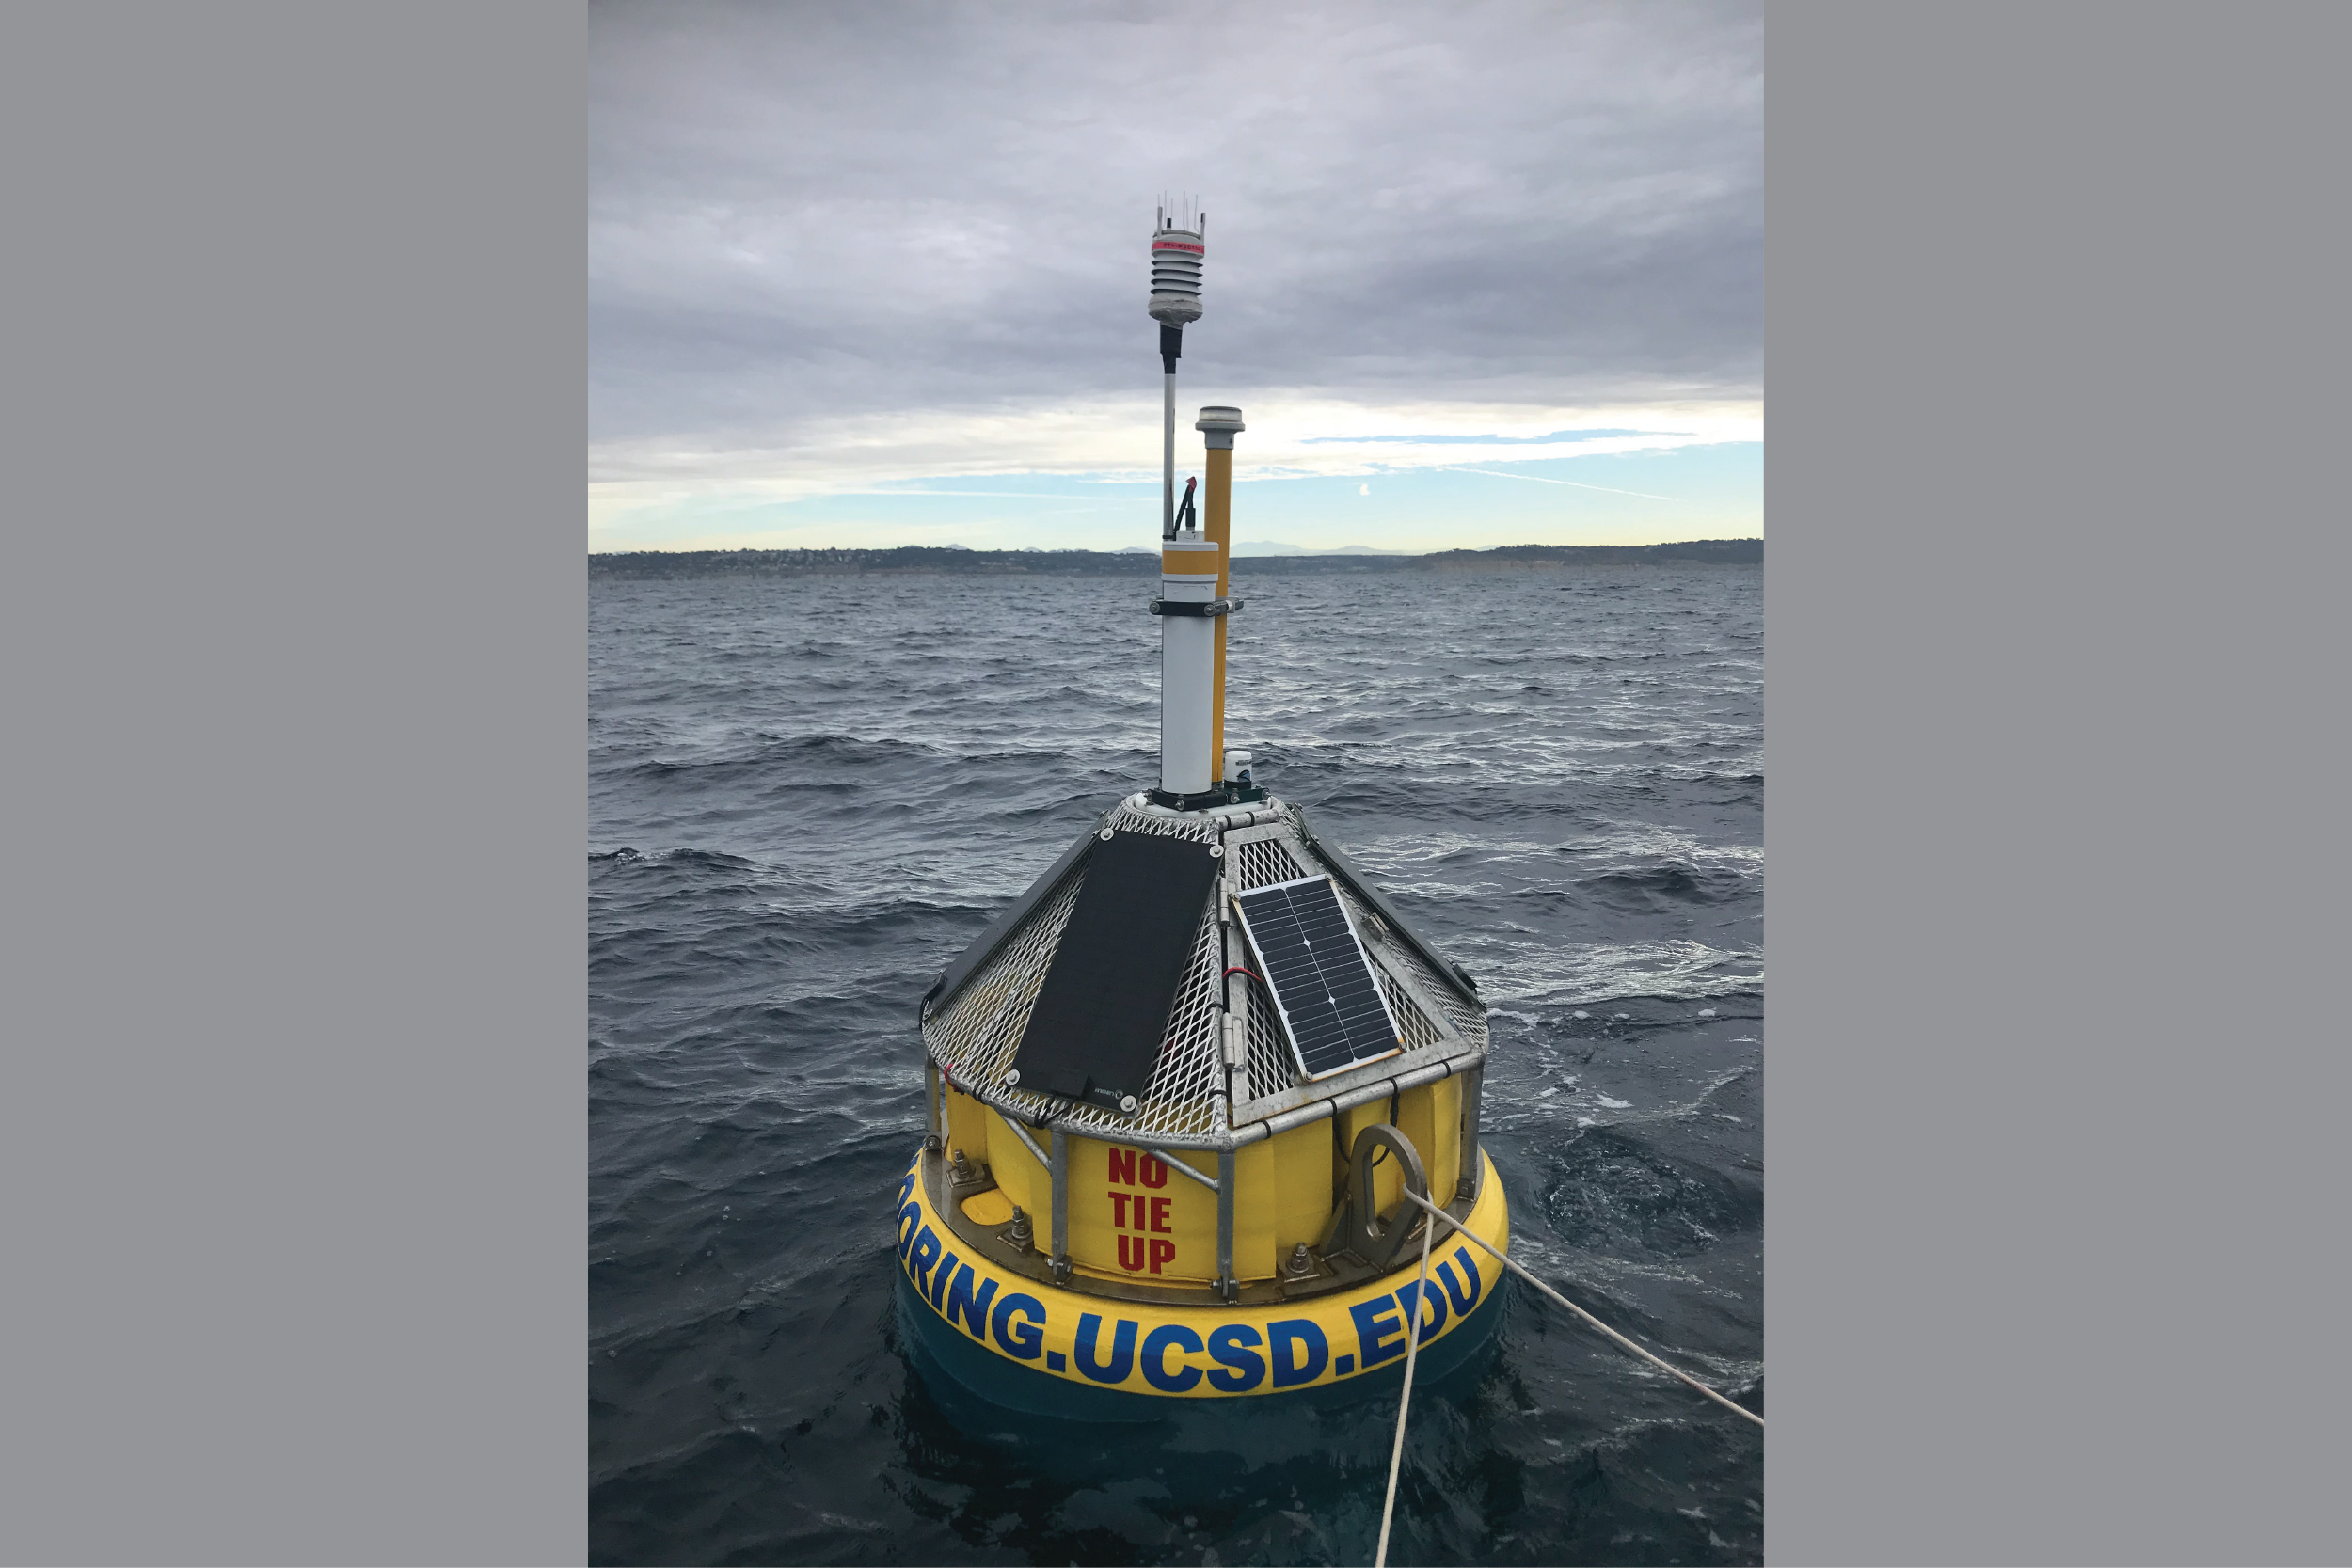 The Del Mar mooring in 2019, with a smaller, more efficient buoy design